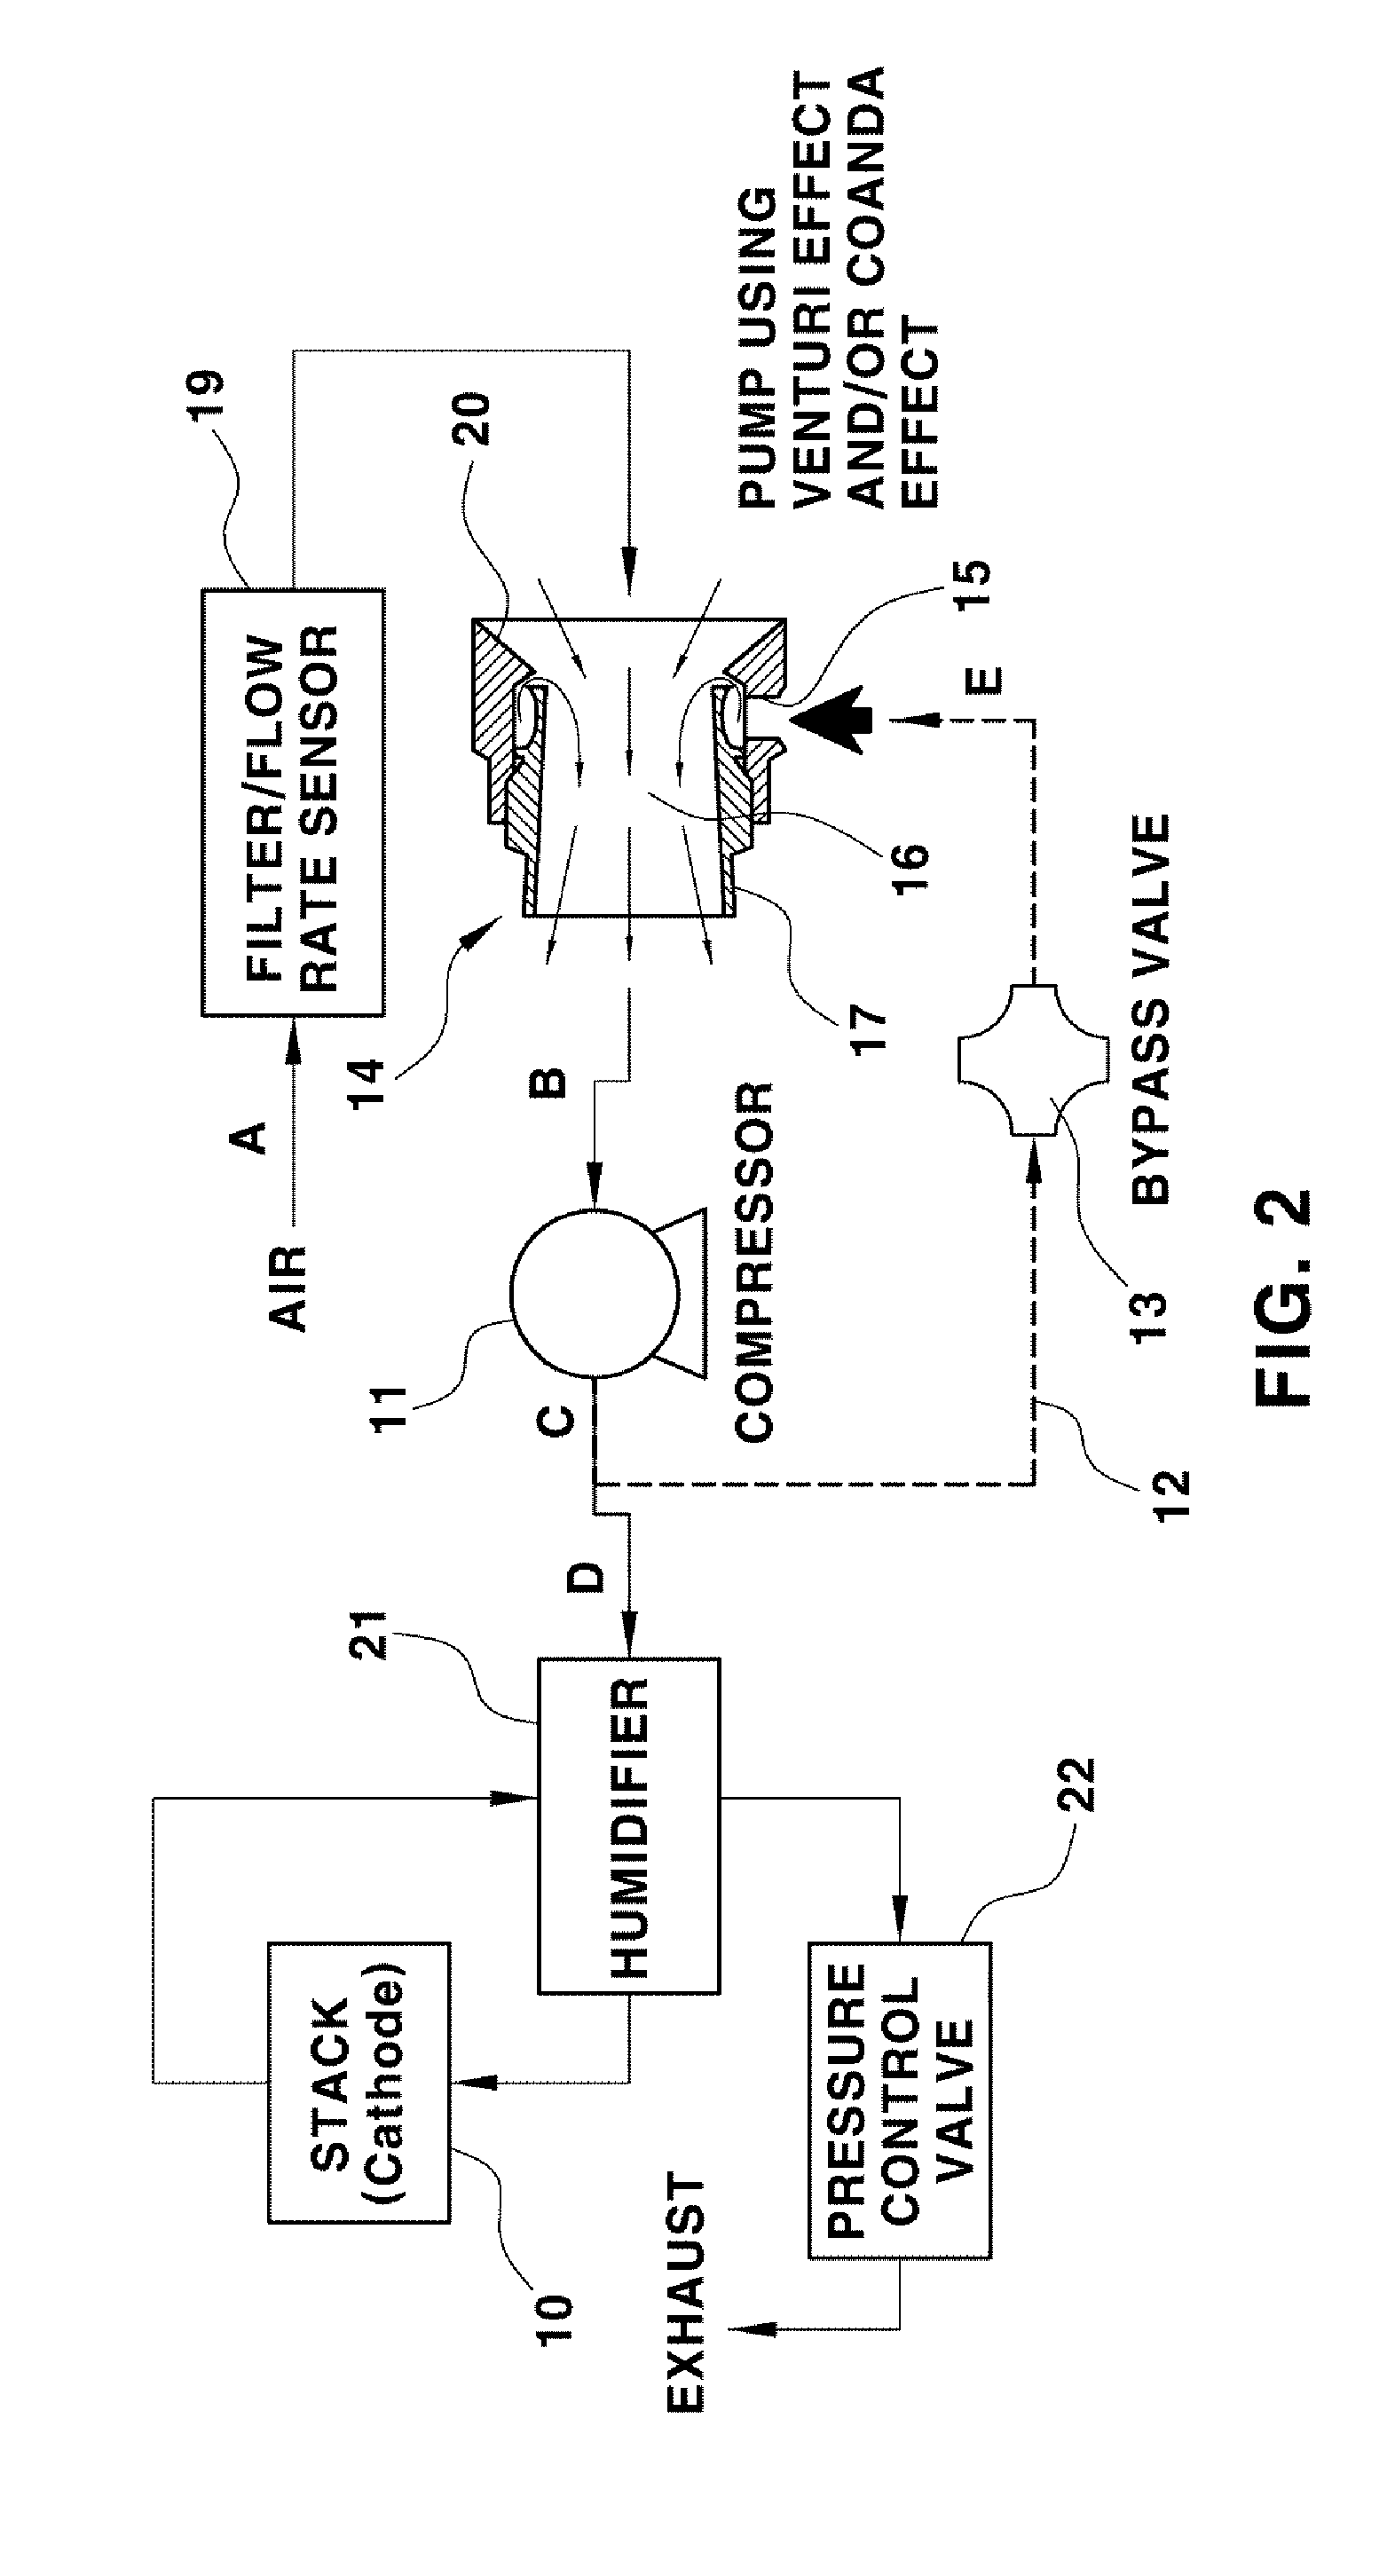 Air supply apparatus and method for fuel cell